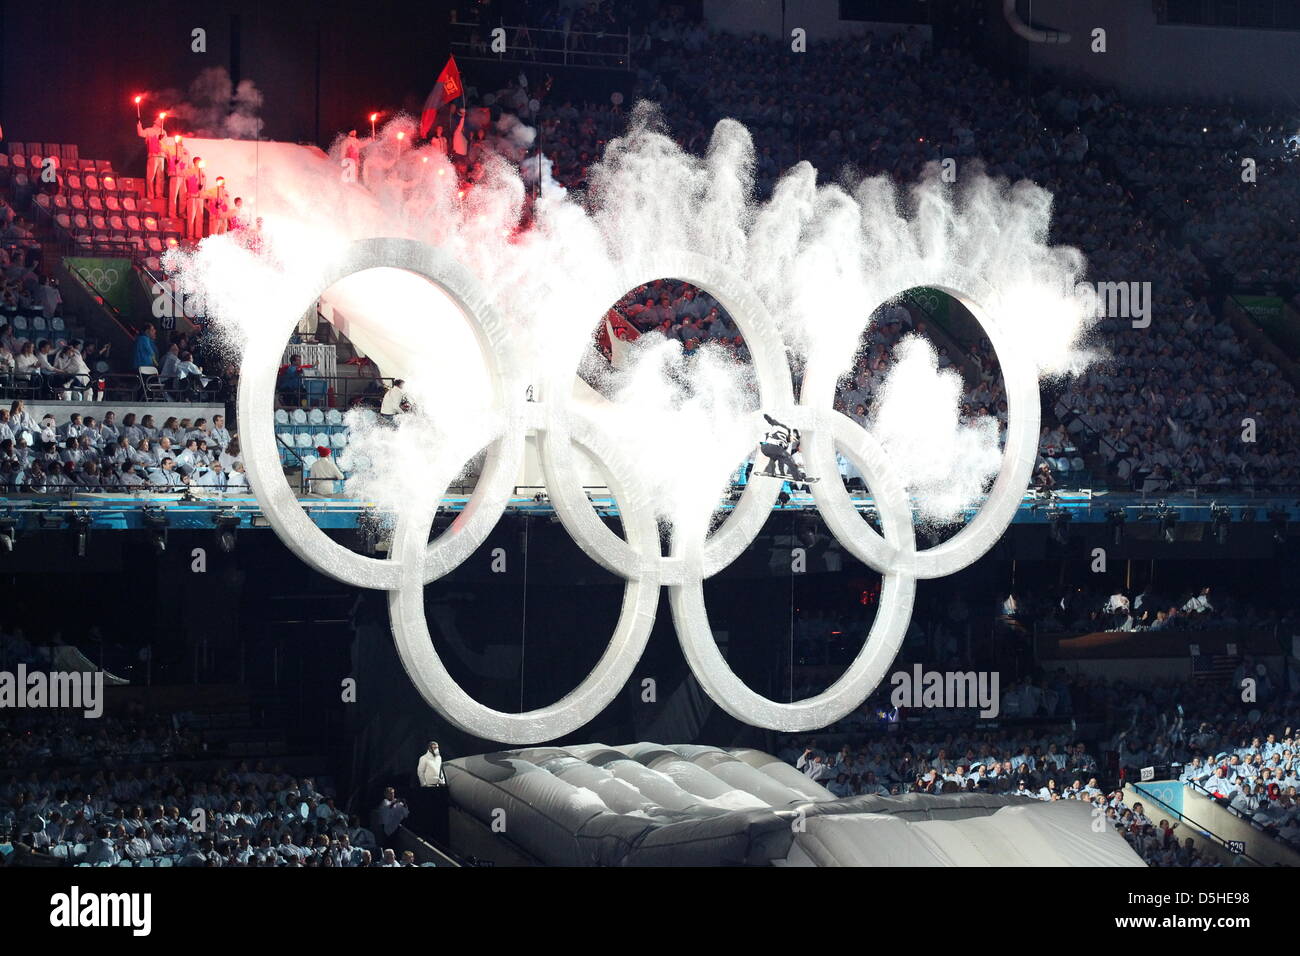 A snowboarder jumps through the Olympic Rings during the Opening Ceremony of the Vancouver 2010 Olympic Games, at the BC Place Stadium, Vancouver, Canada, 12 February 2010.  +++(c) dpa - Bildfunk+++ Stock Photo